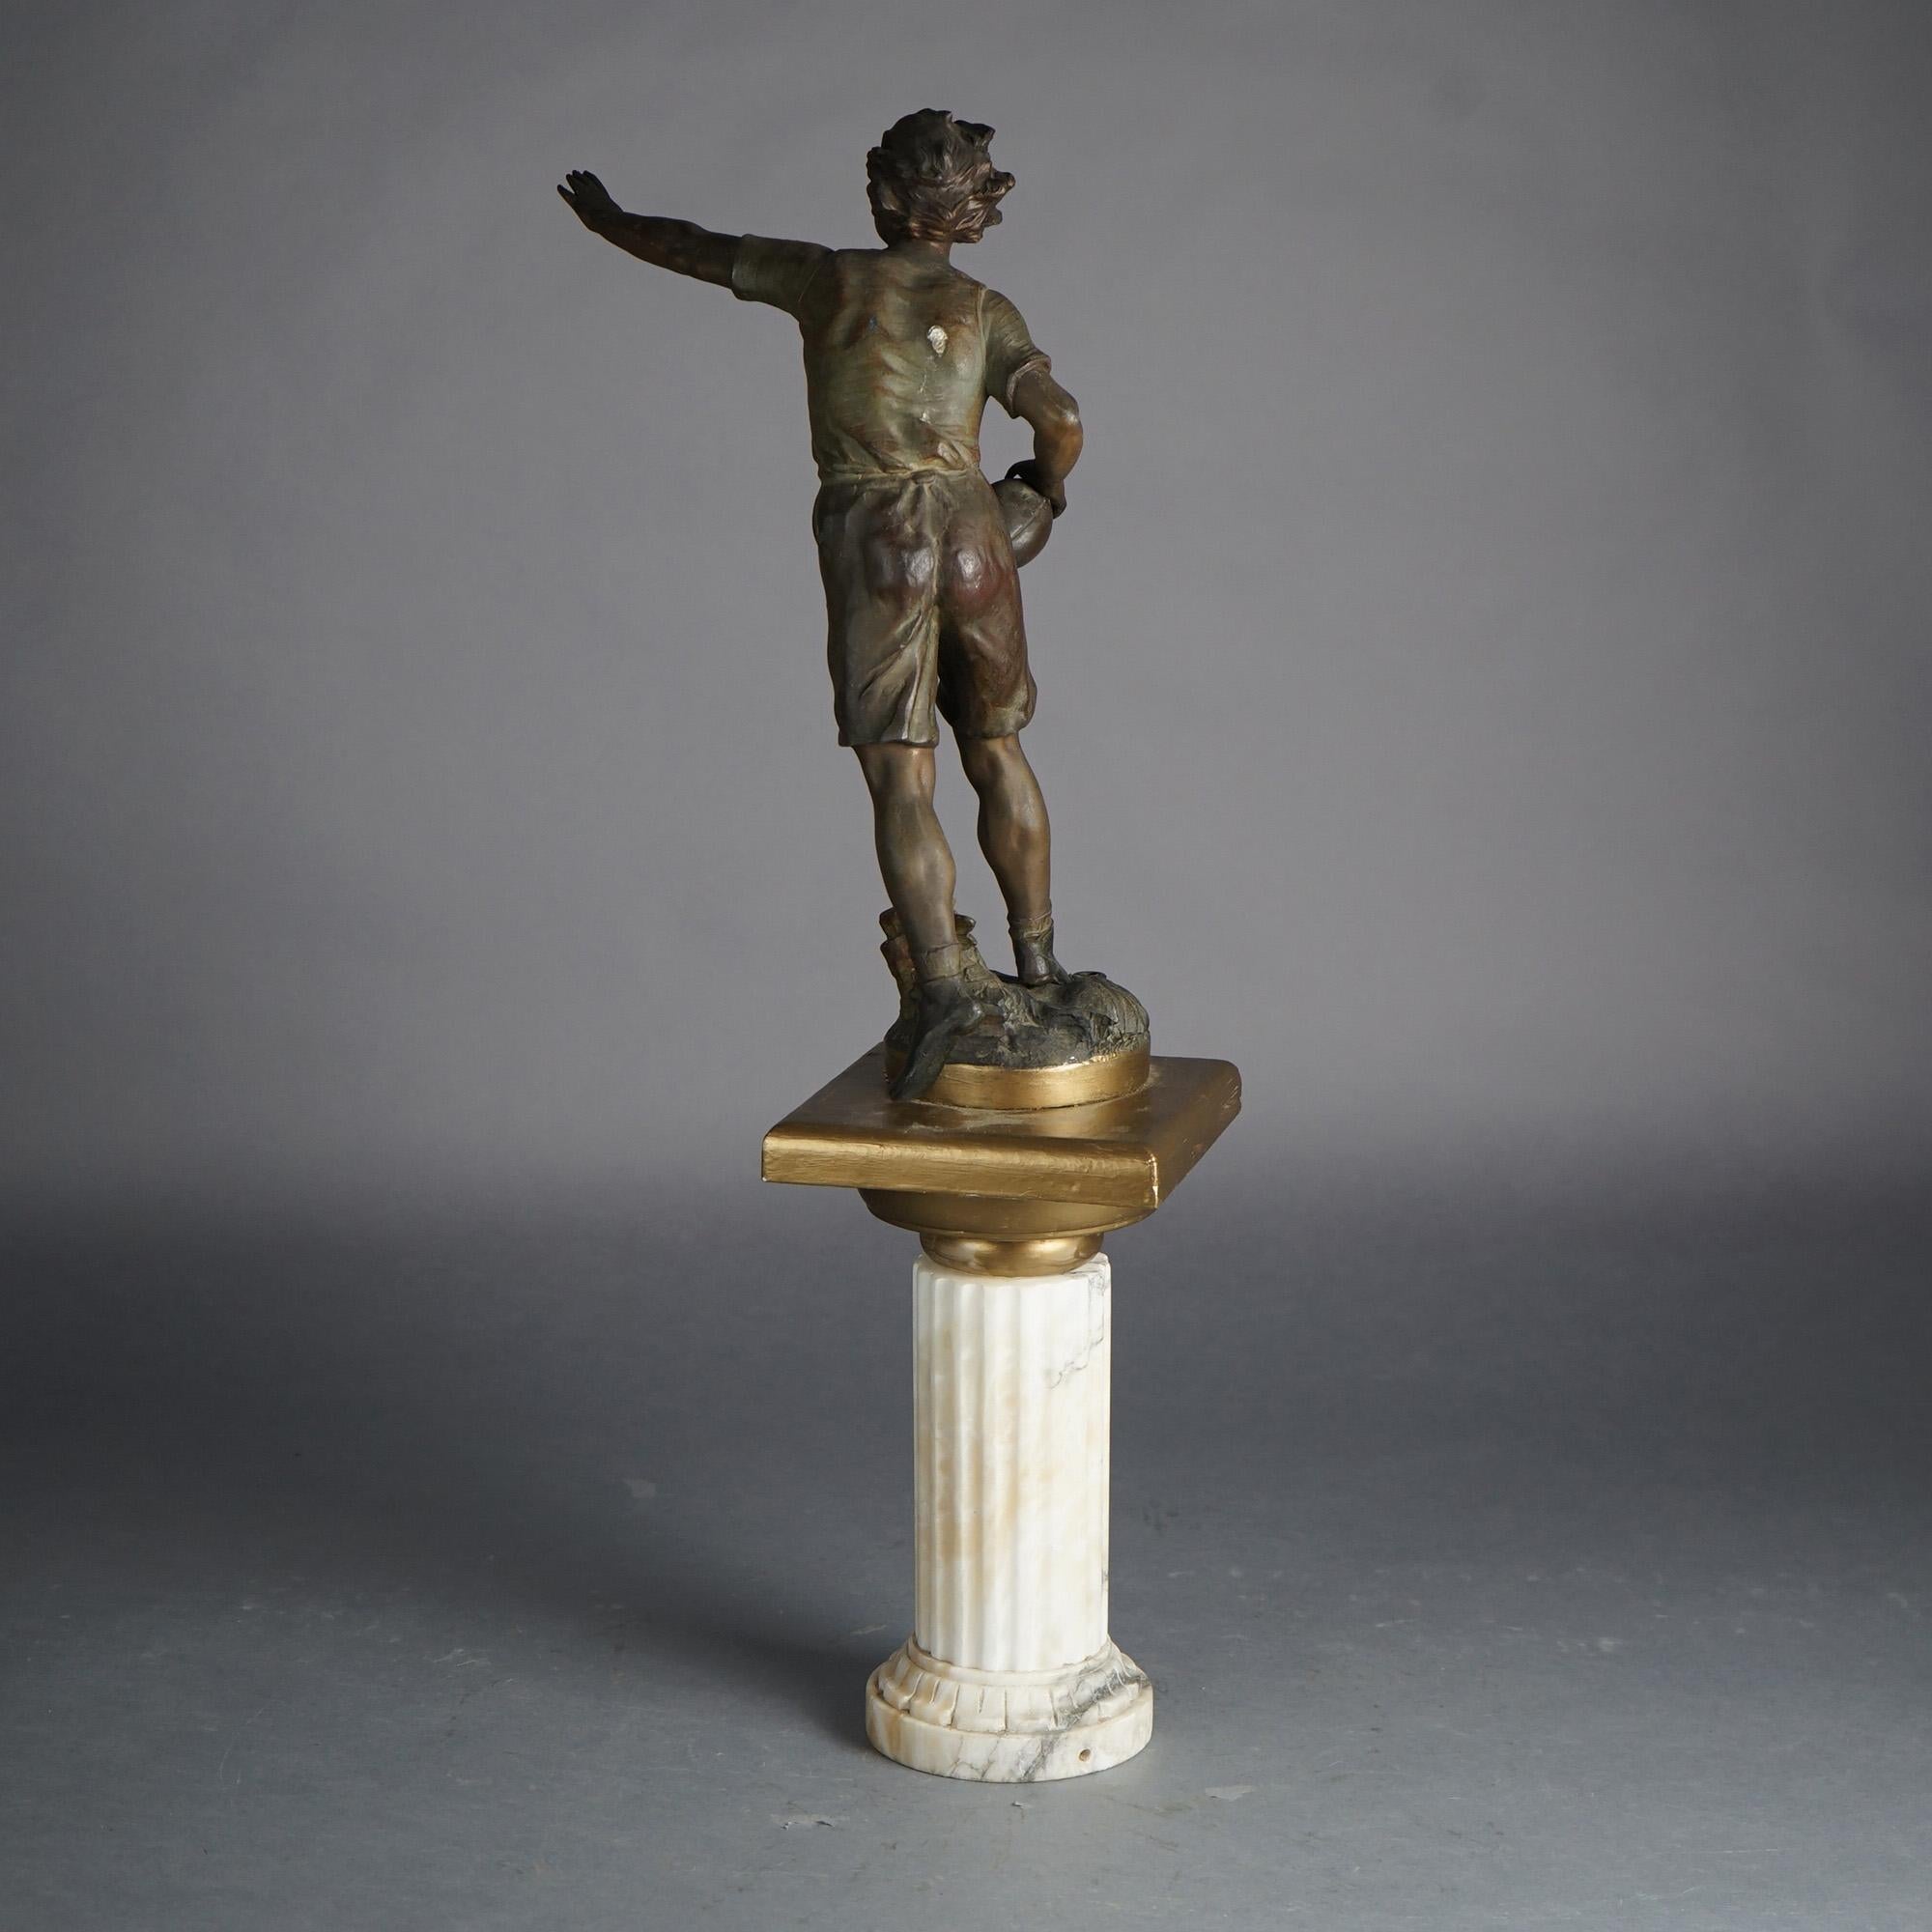 20th Century Moreau Bronzed Metal Foot Player Statue on Marble Fluted Column C1900